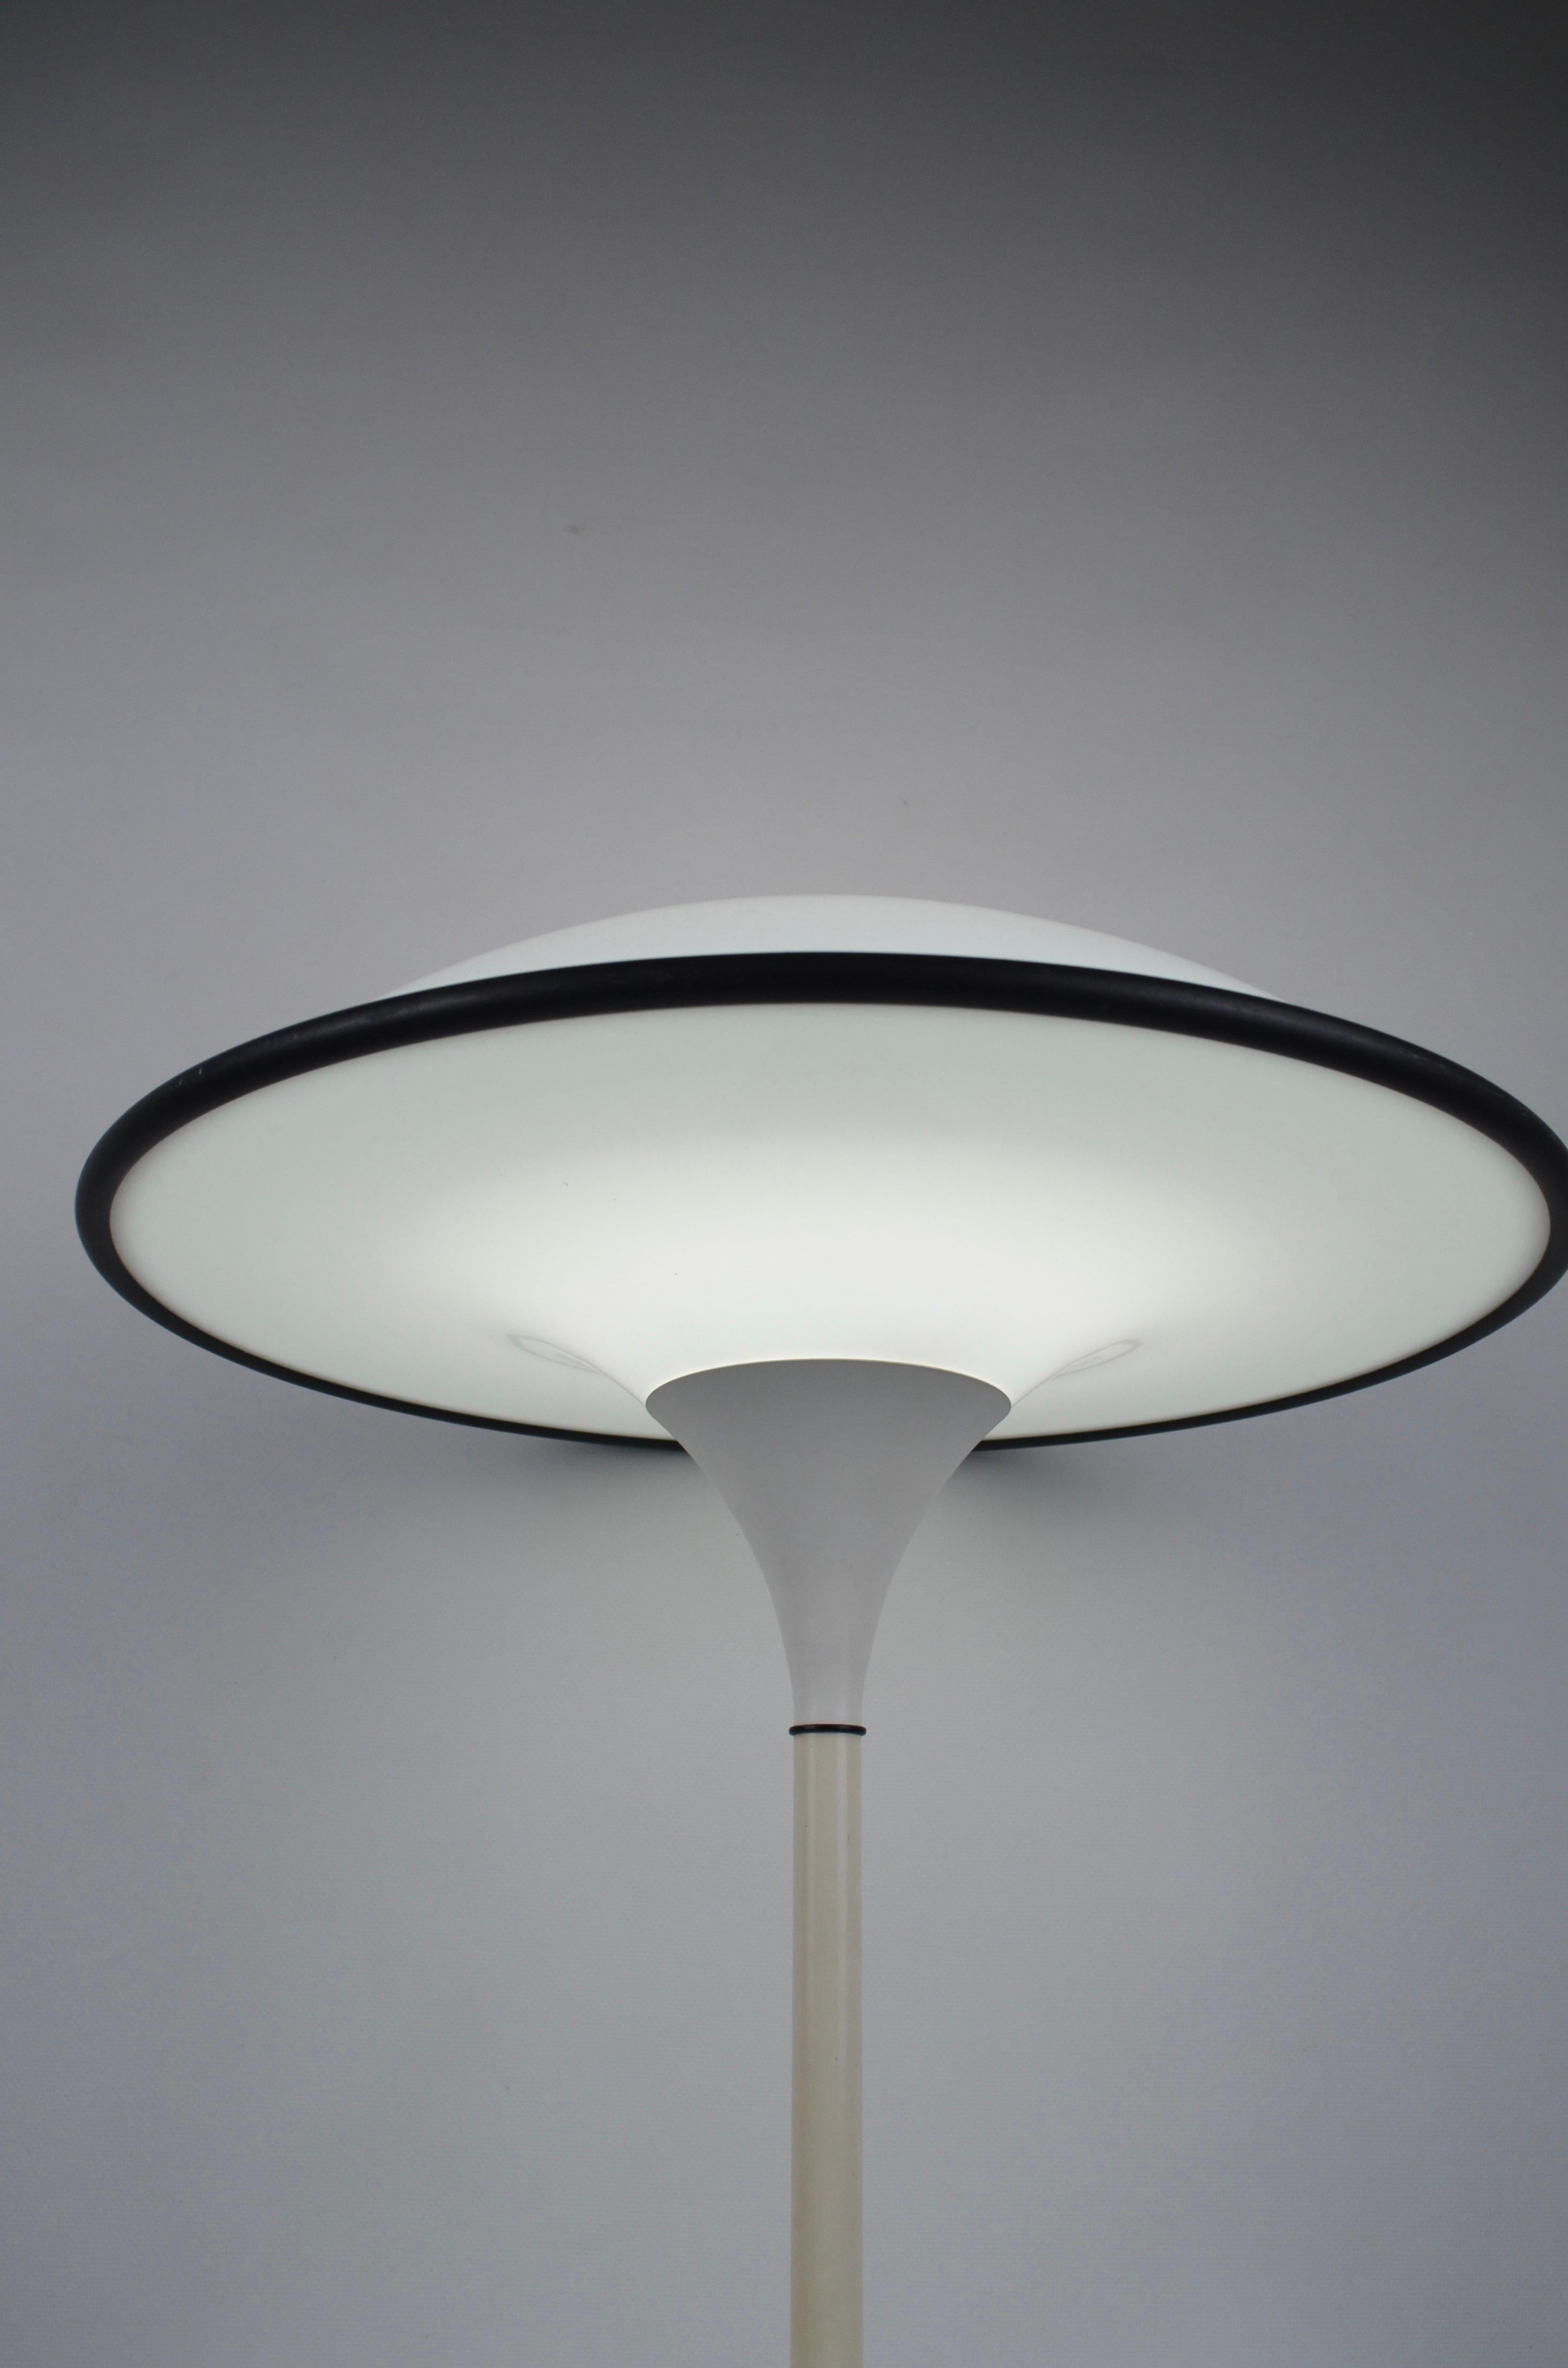 Cosmos Lamp by Preben Jacobsen for Fog Morup, 1984 For Sale 2